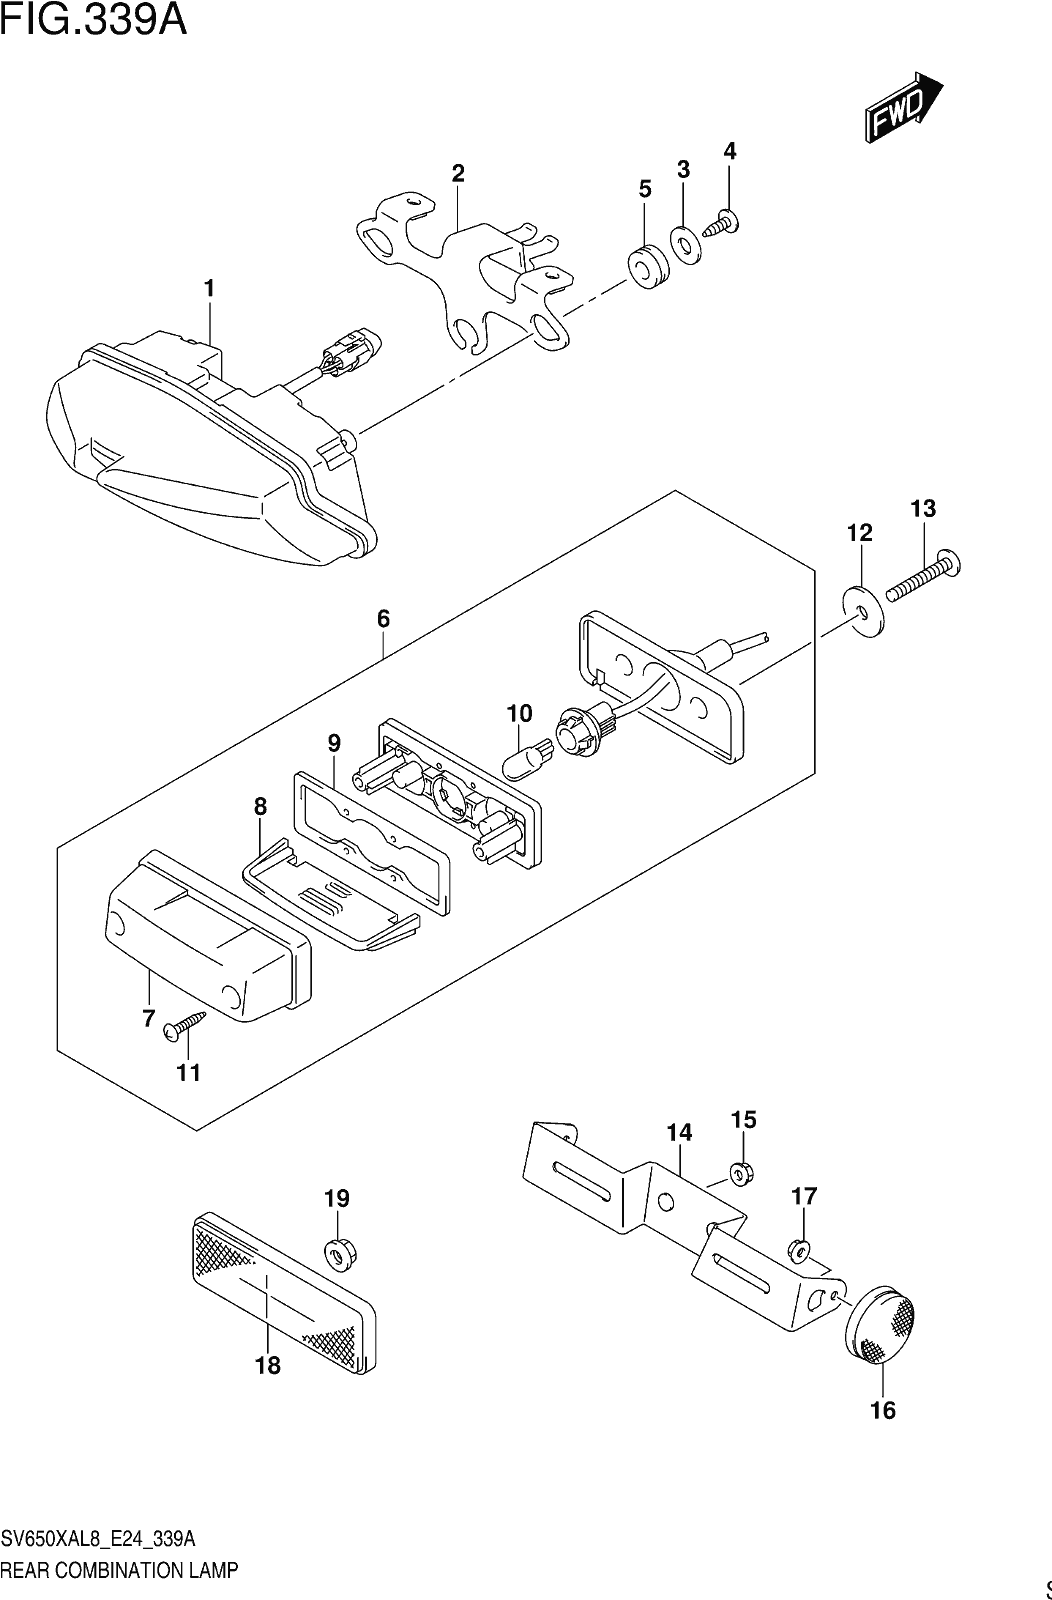 Fig.339a Rear Combination Lamp